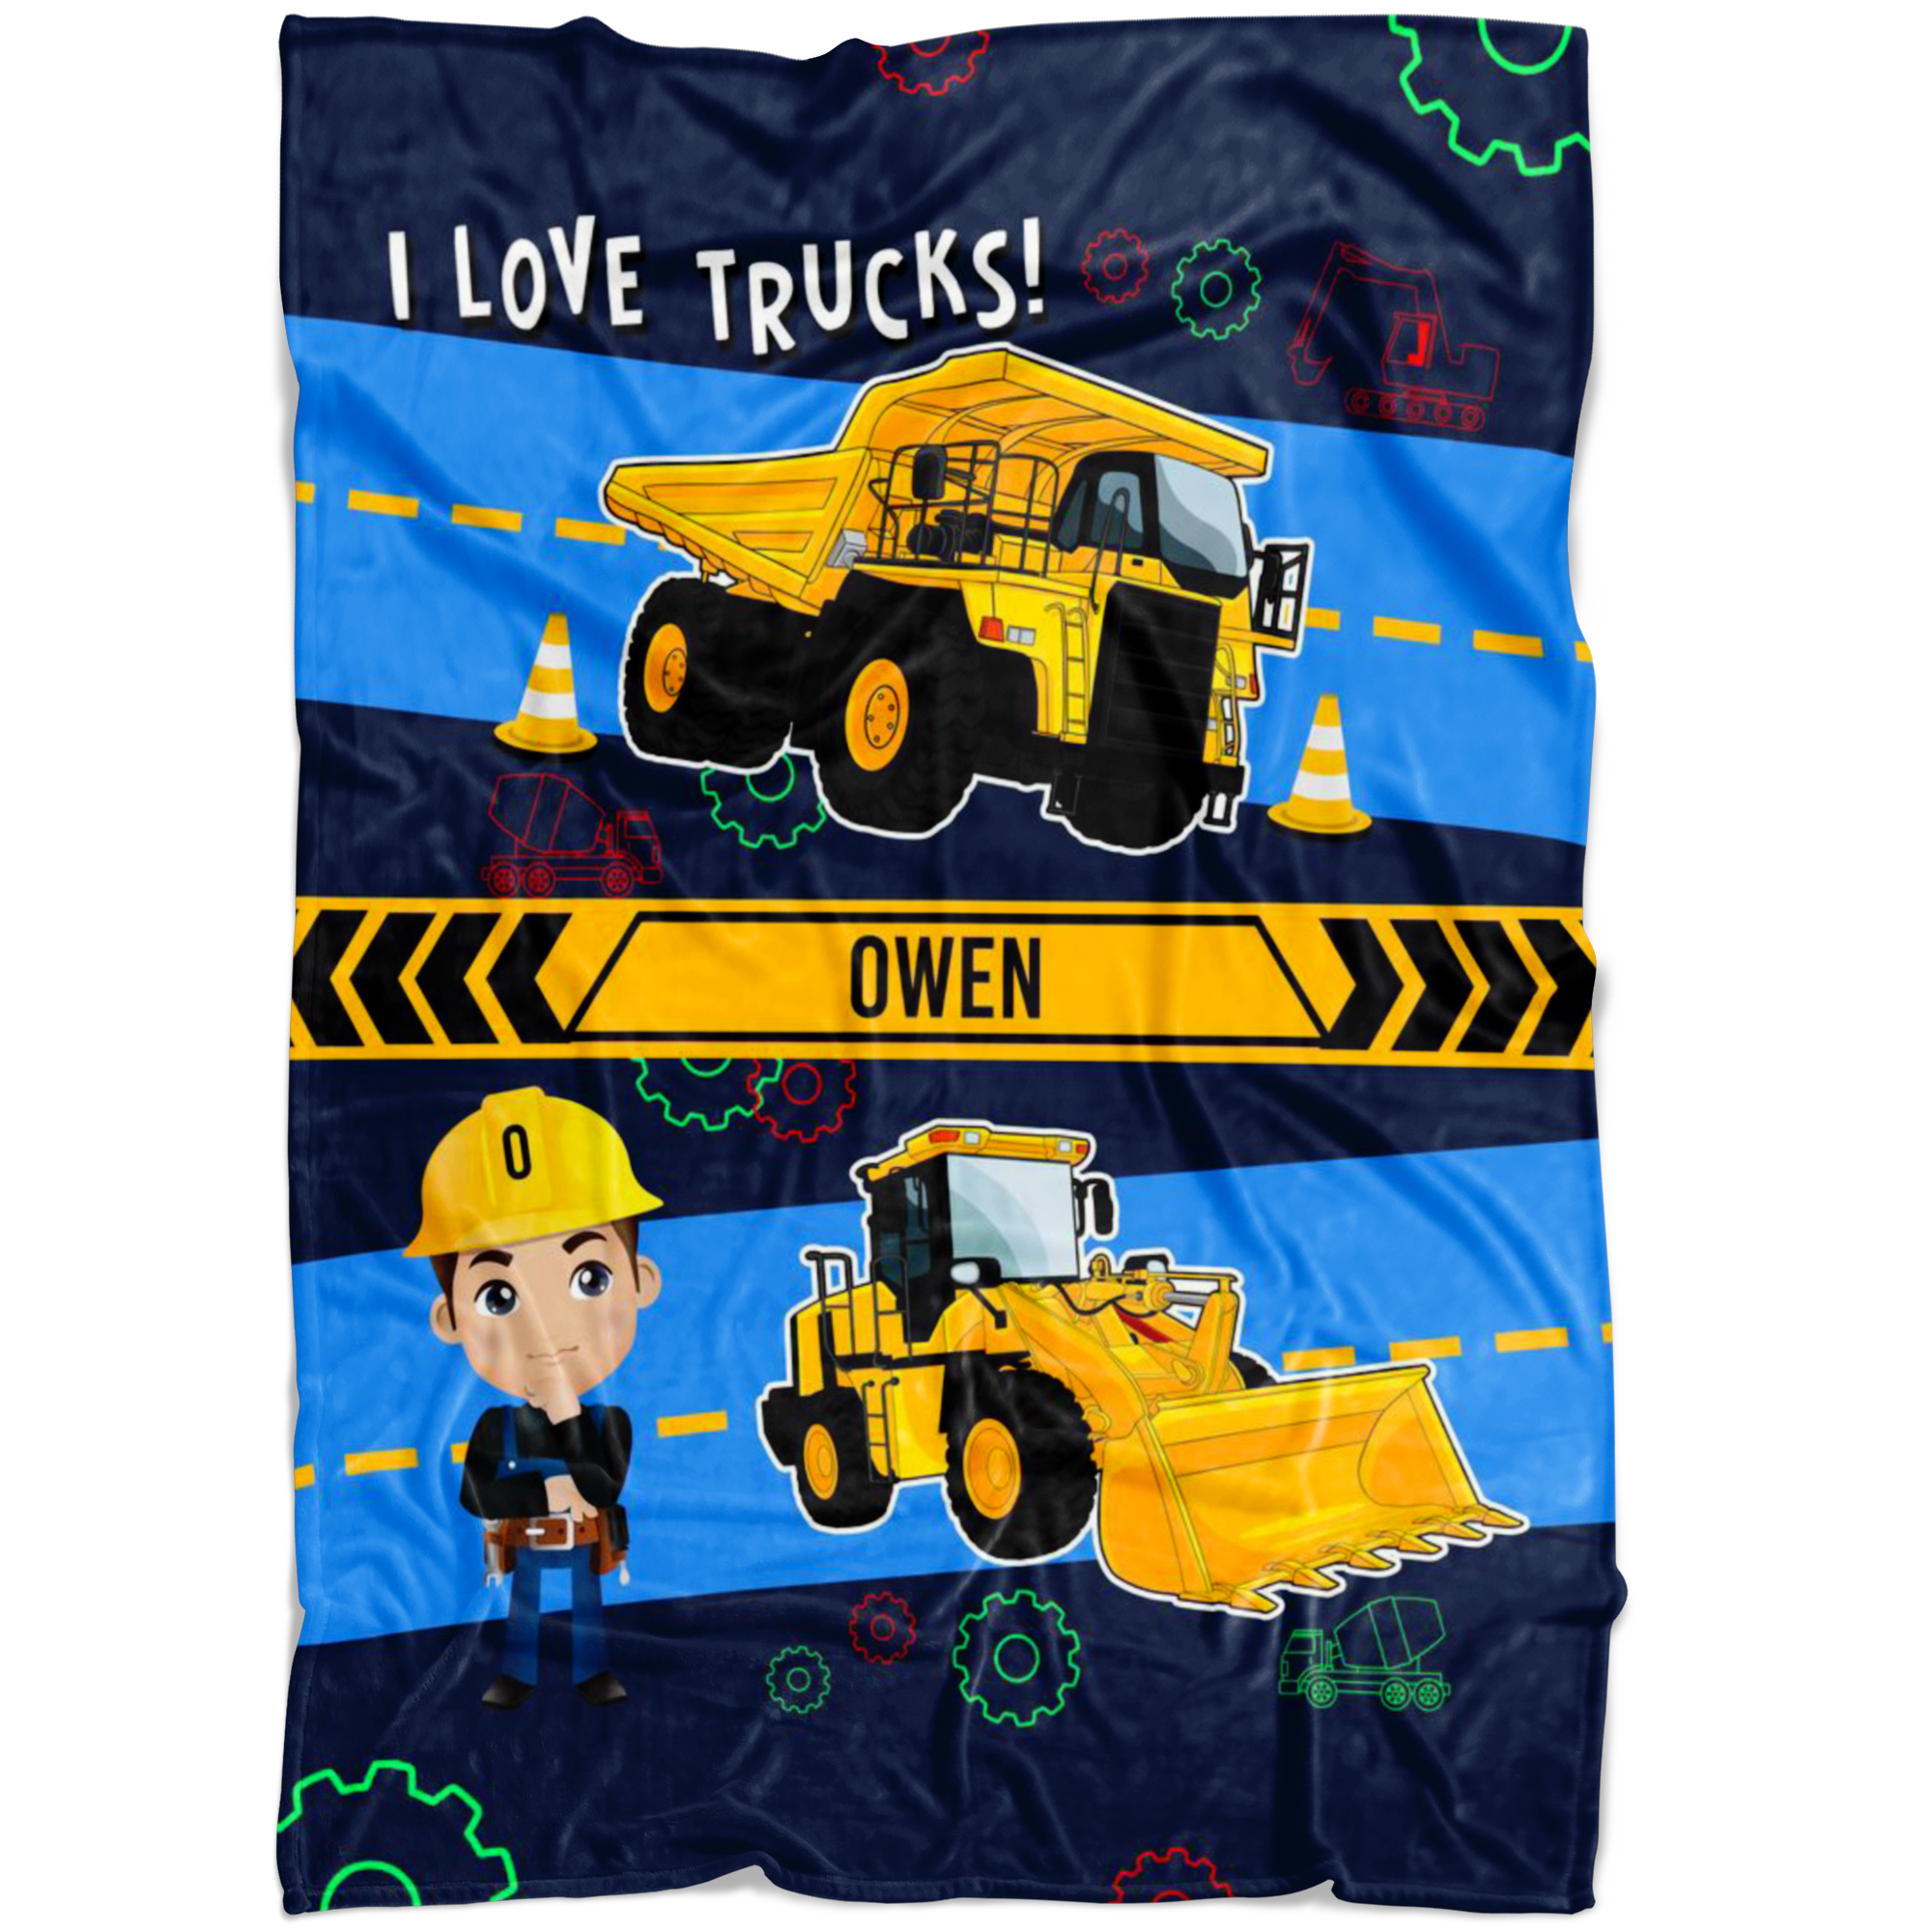 Personalized Name I Love Trucks Blanket for Boys & Girls with Character Personalization - Owen